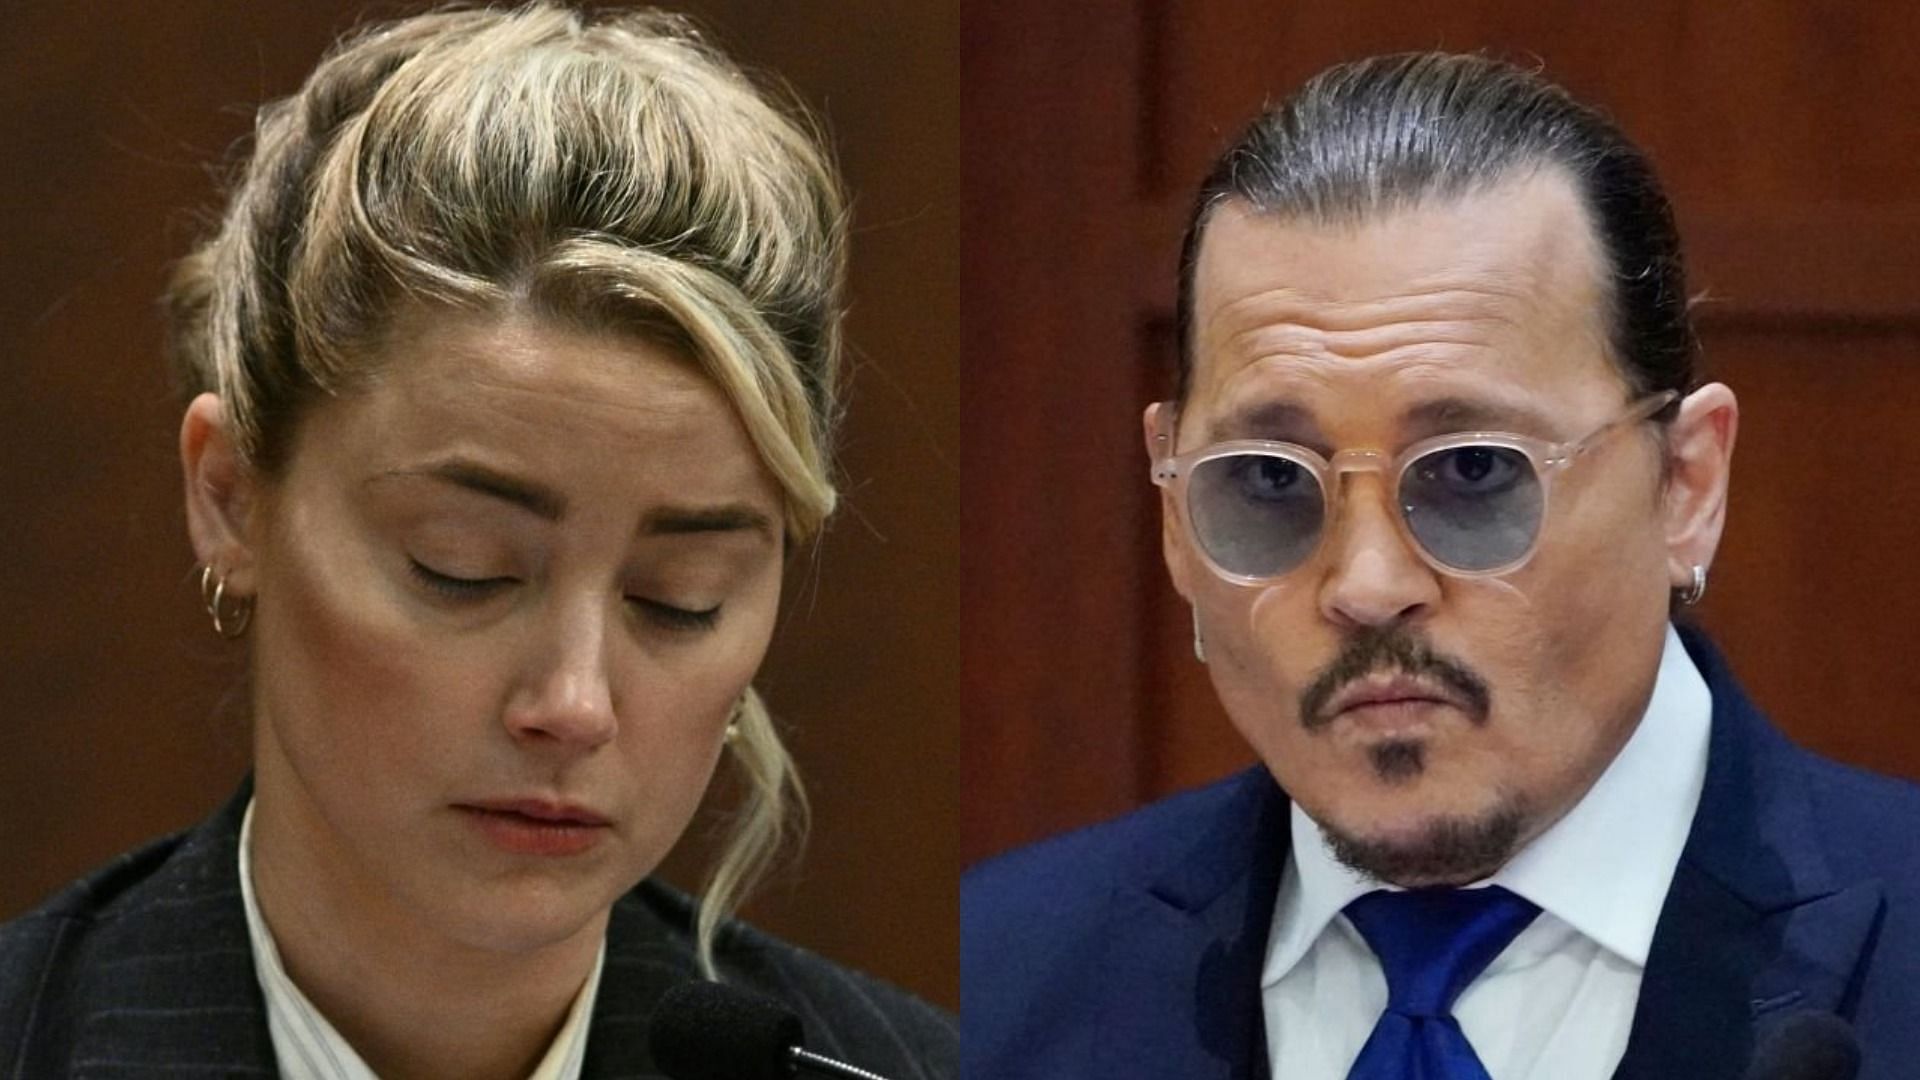 Amber Heard addressed why Johnny Depp avoided her gaze in court (Image via Getty Images)